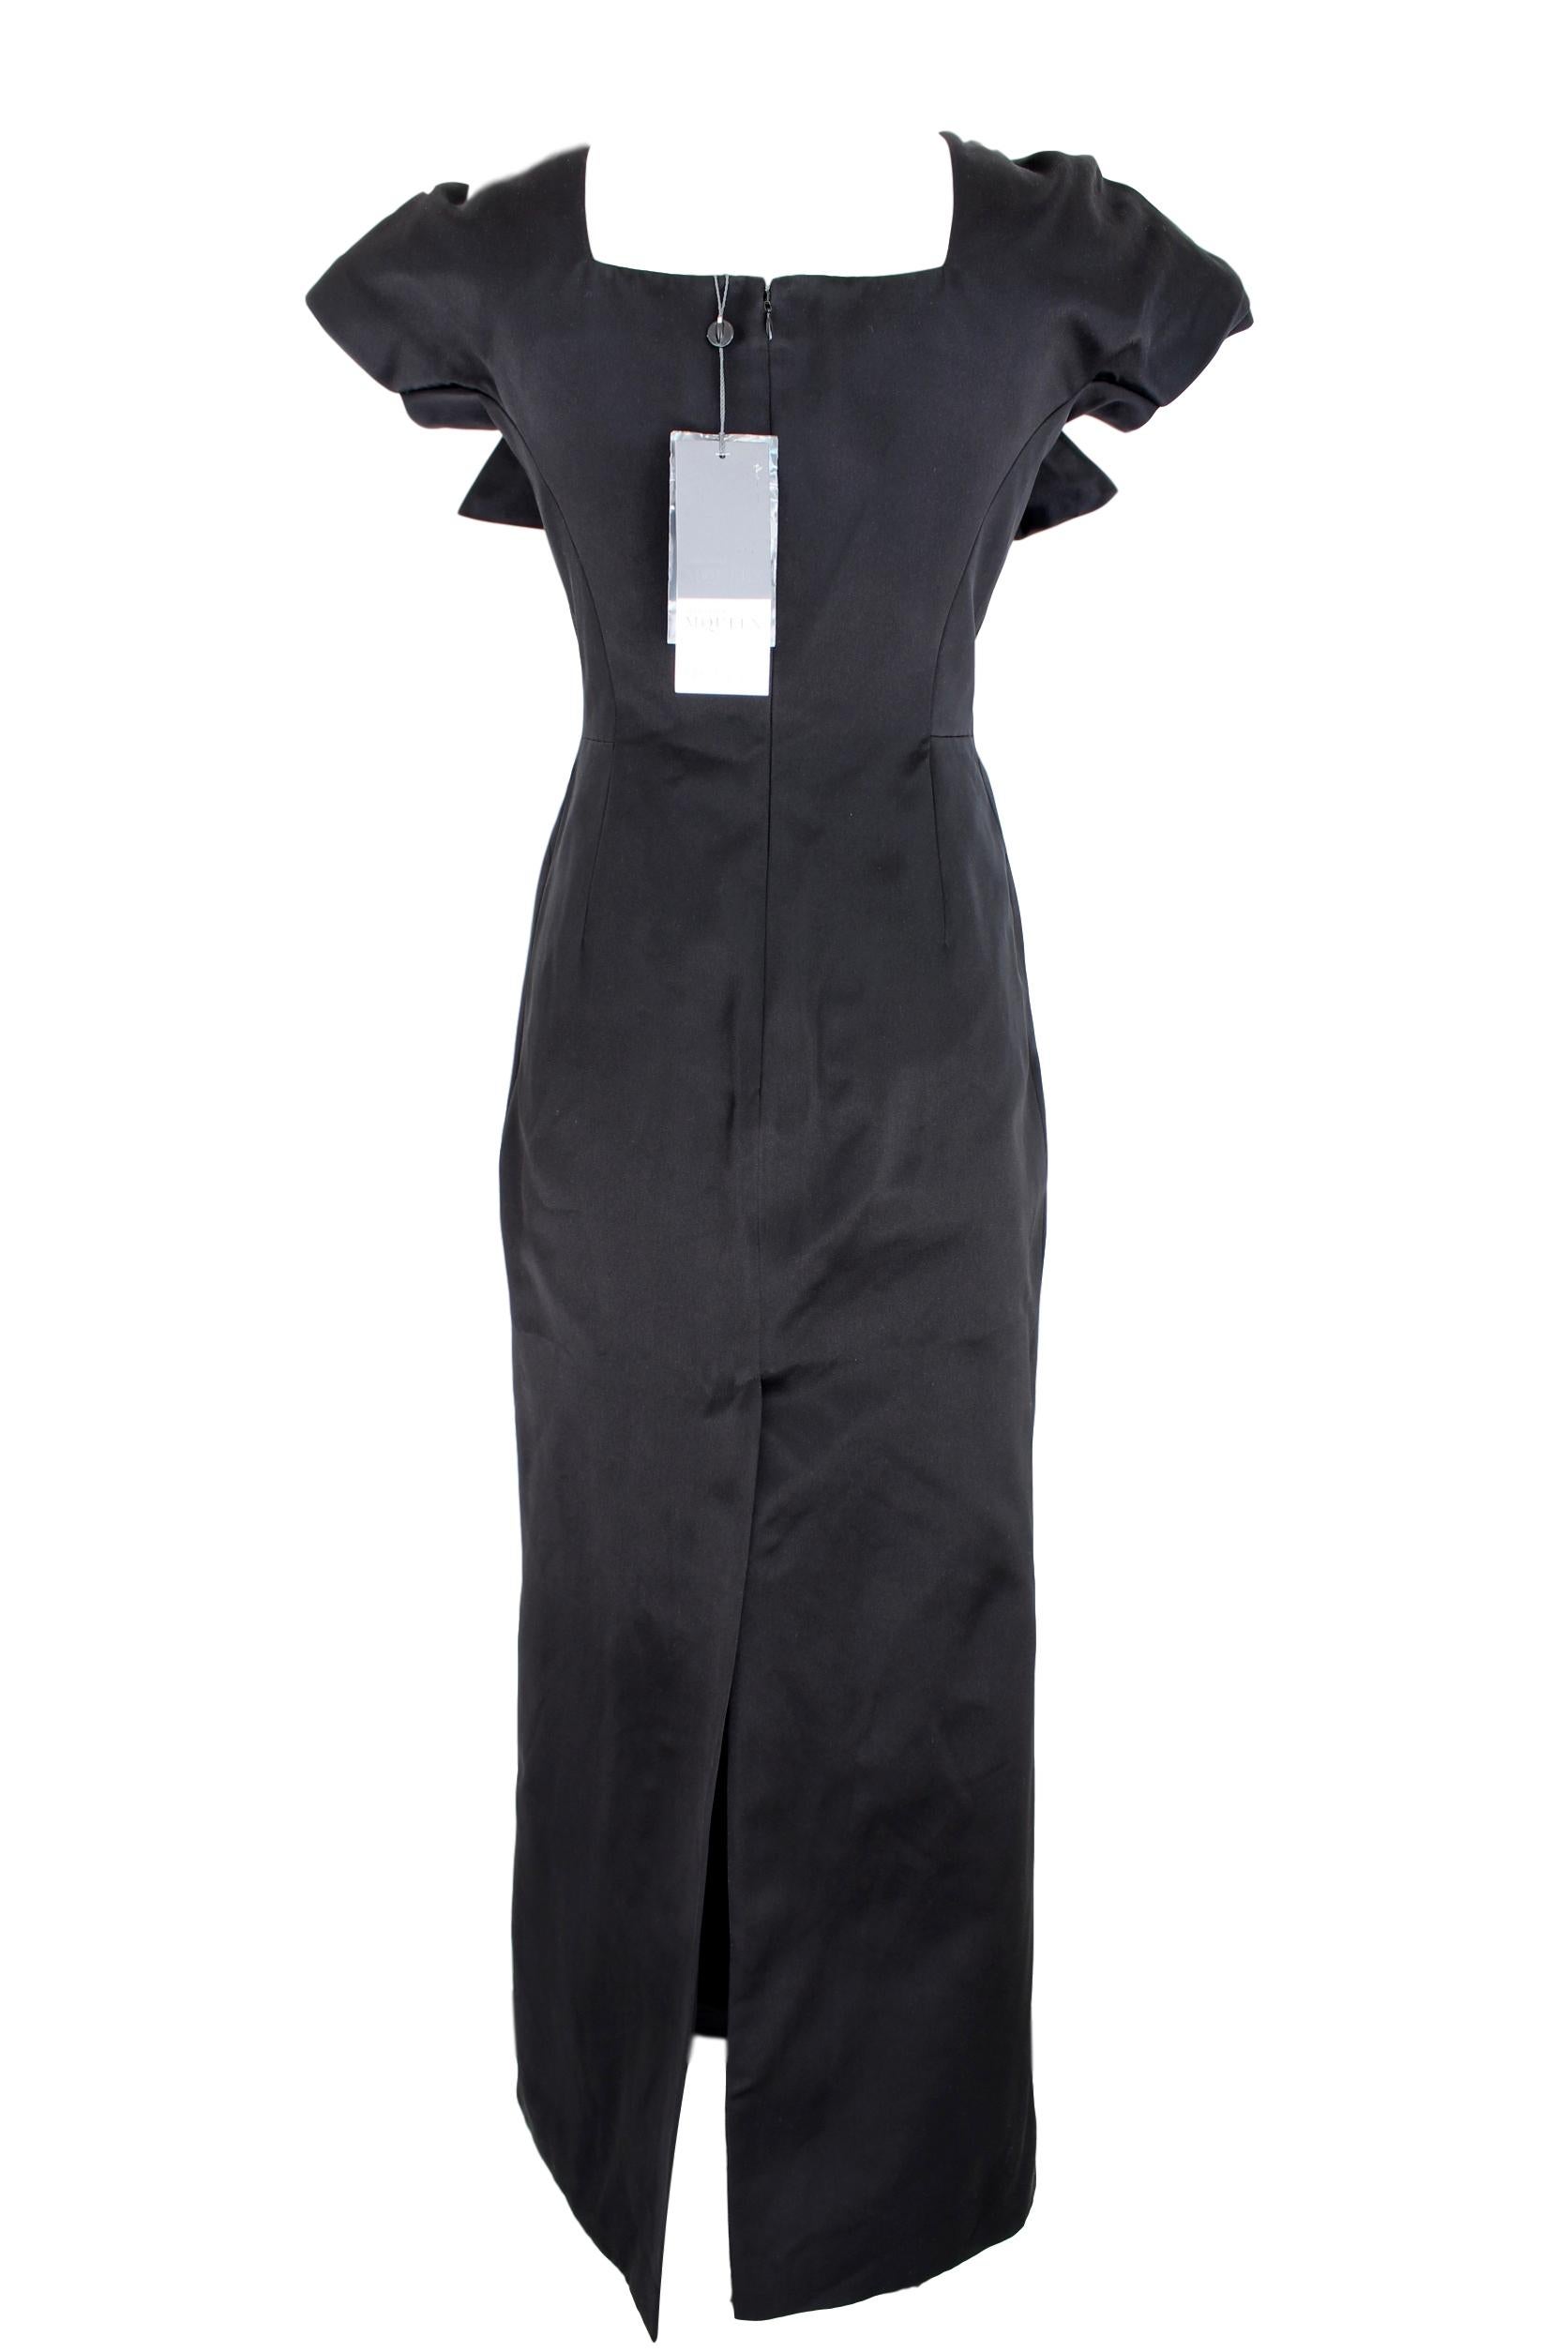 Alexander Mcqueen long evening grows dress. Composition 100% silk, black. Bow sleeves and square neckline, made in Italy. 2015 Collection. The dress is new with labels, initial resale price 3,435.00 pounds.

Size 44 IT 10 US 12 UK

Shoulders: 44